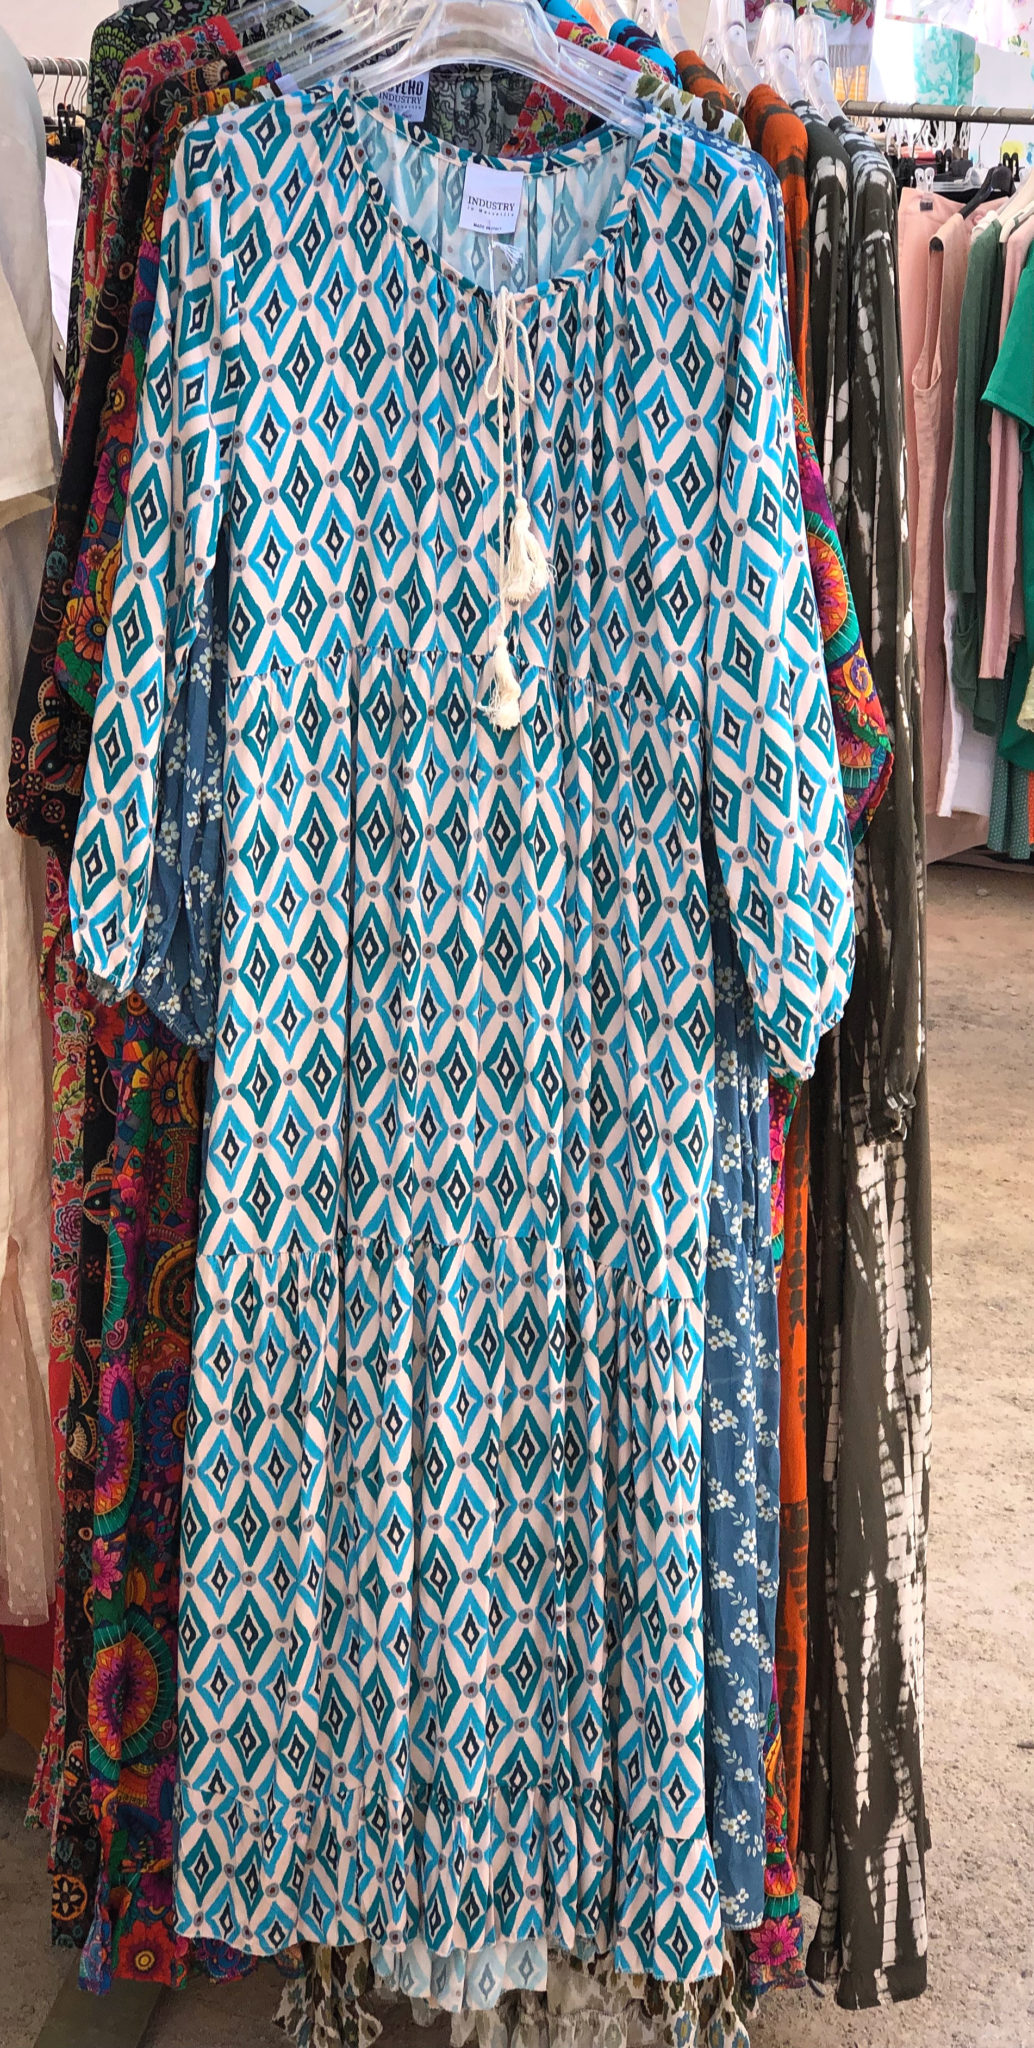 Kaftans in St Tropez market - Chic at any age